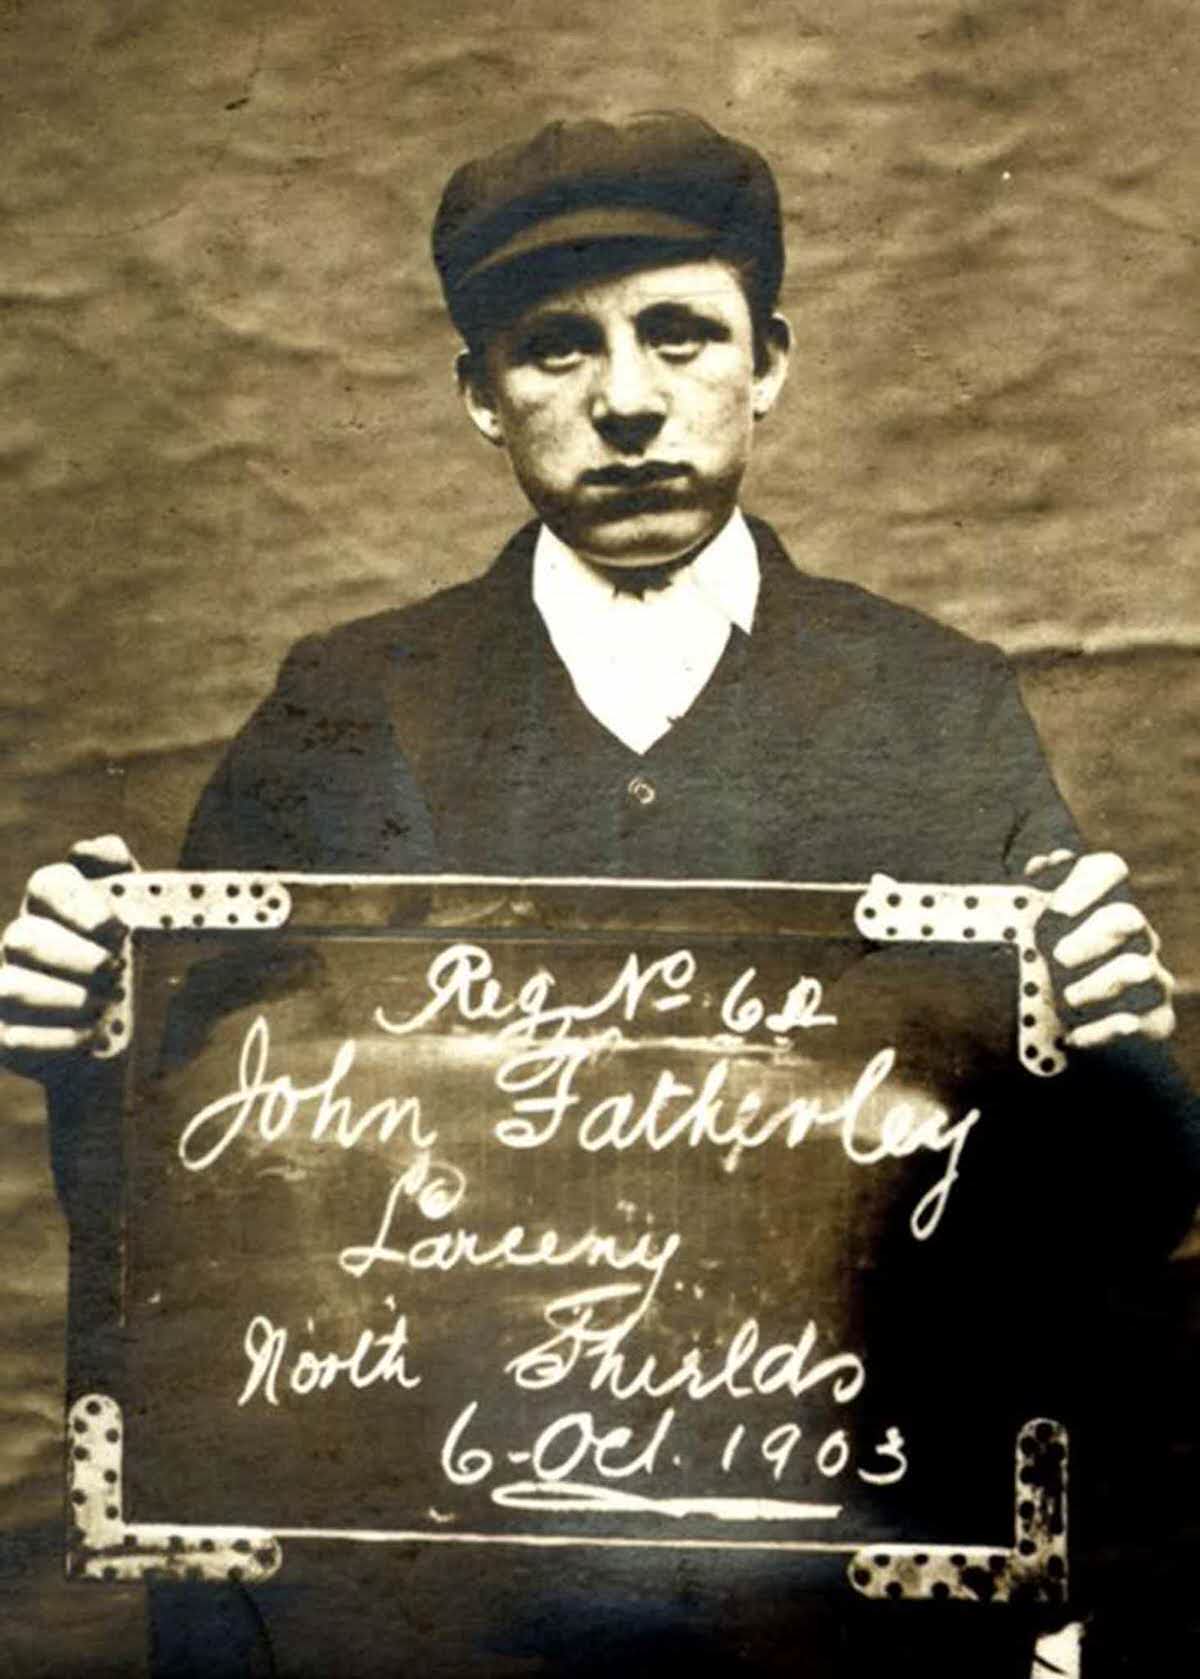 John Fatherley, 16, arrested for stealing from a ship chandler’s store, 1903.